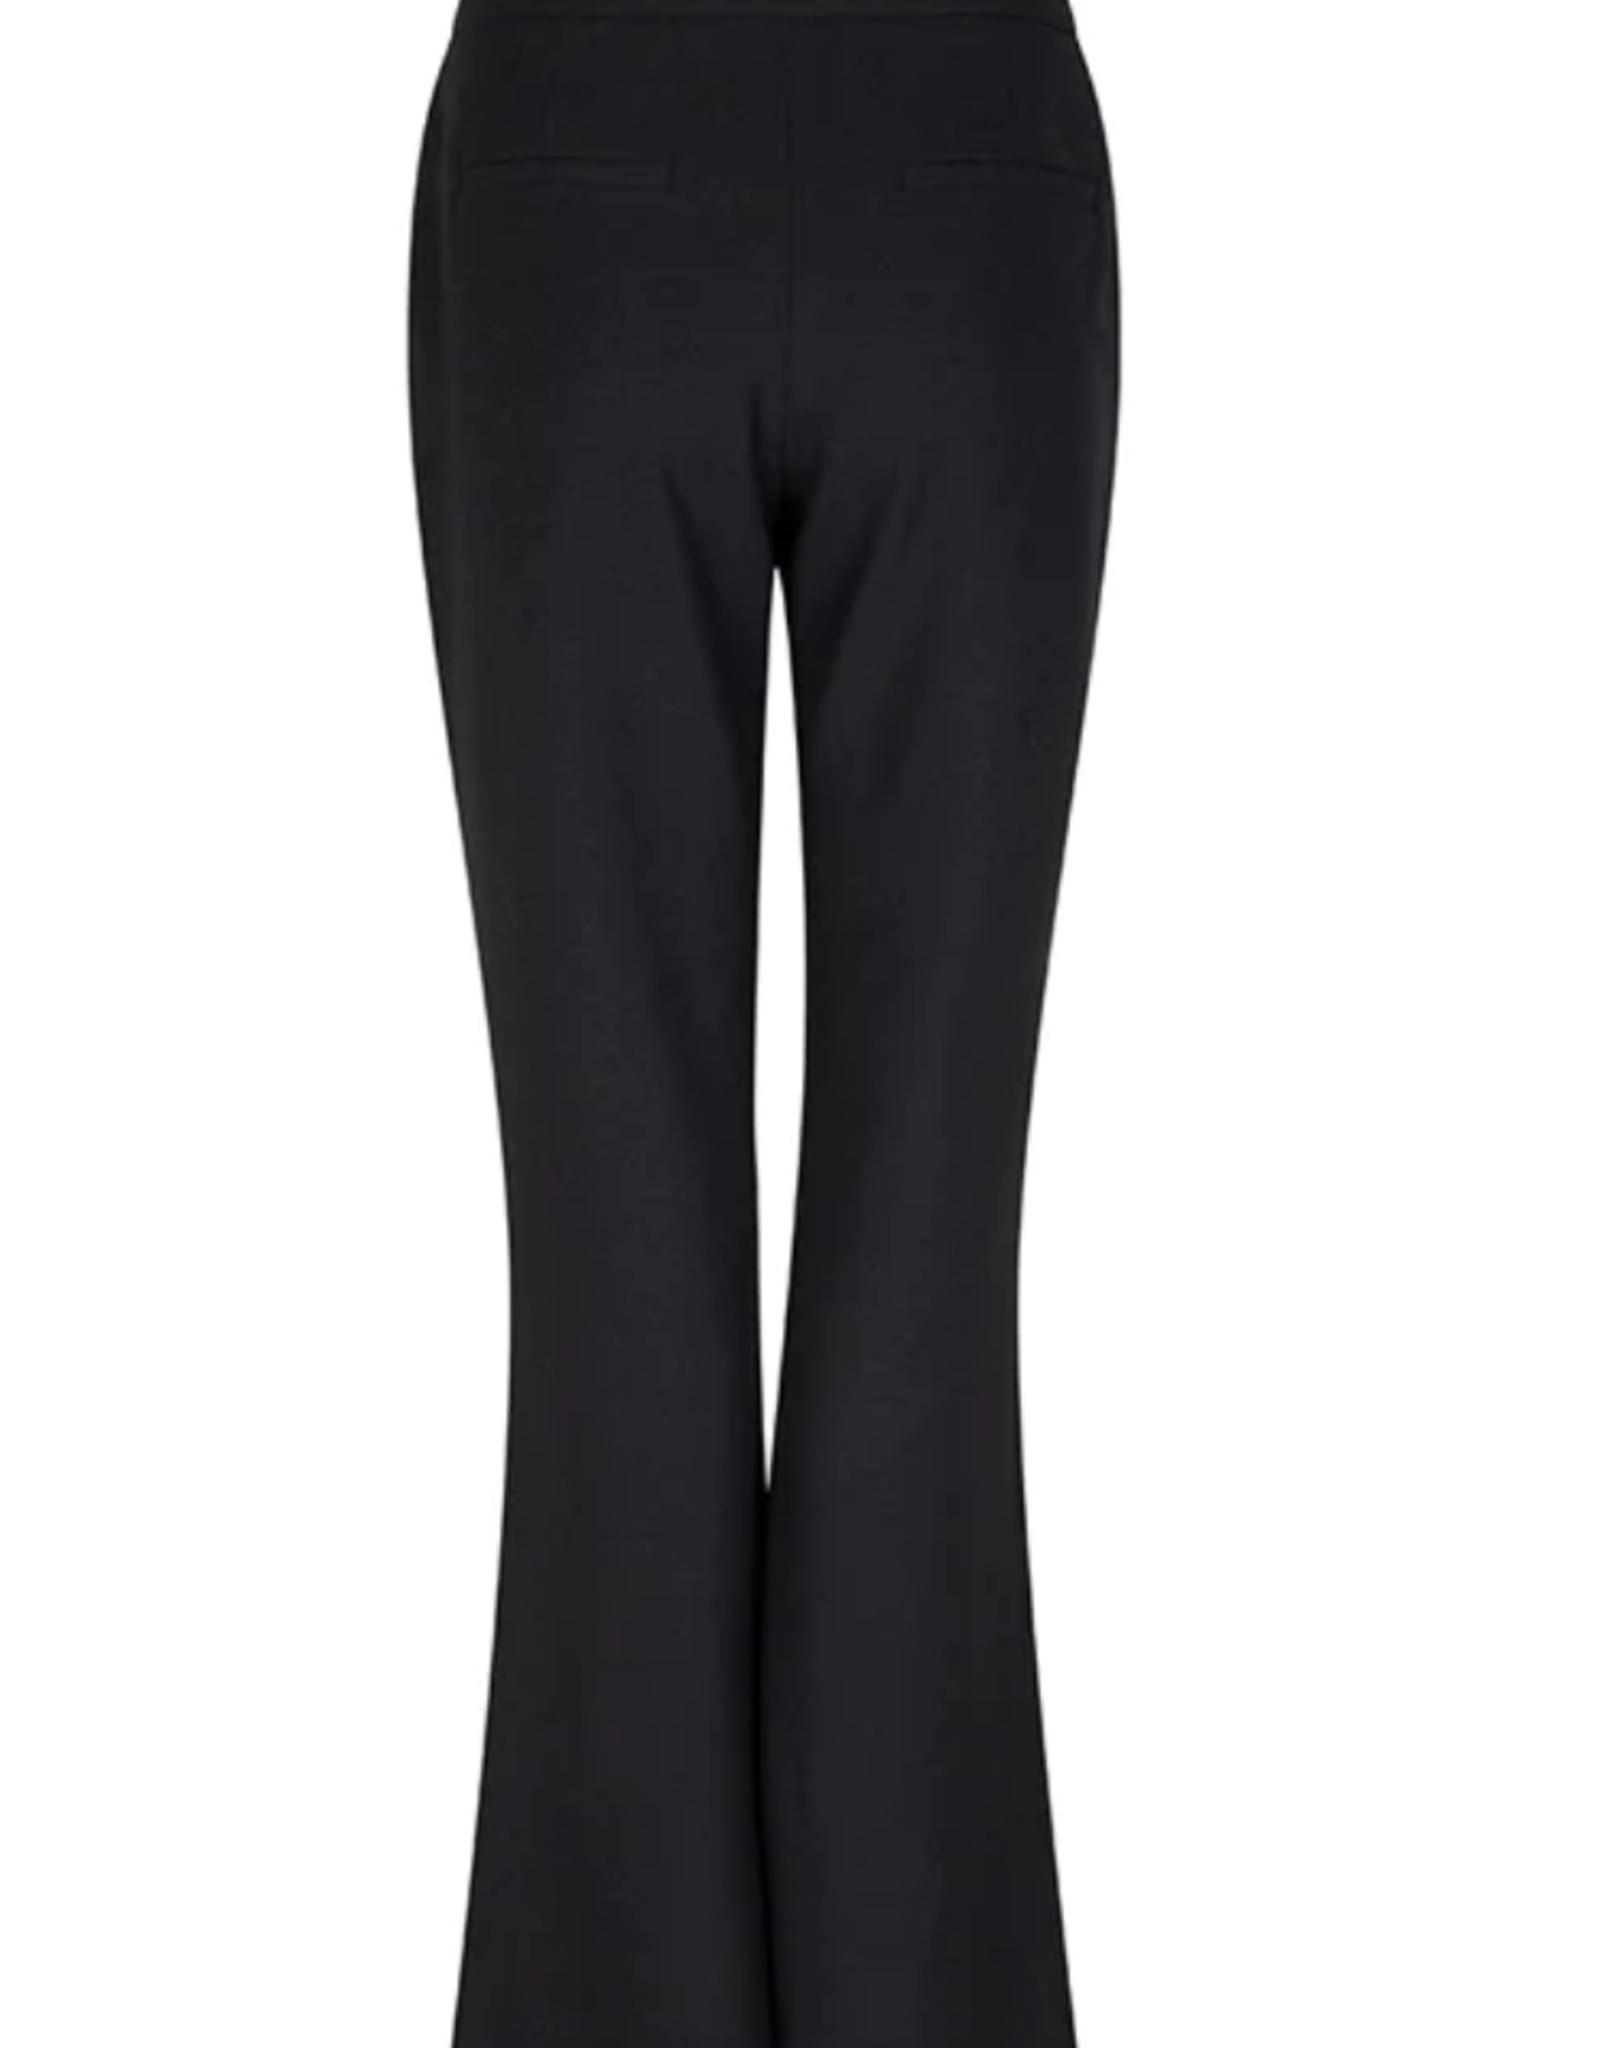 Ruby Tuesday REDFORD flaired pants BLACK